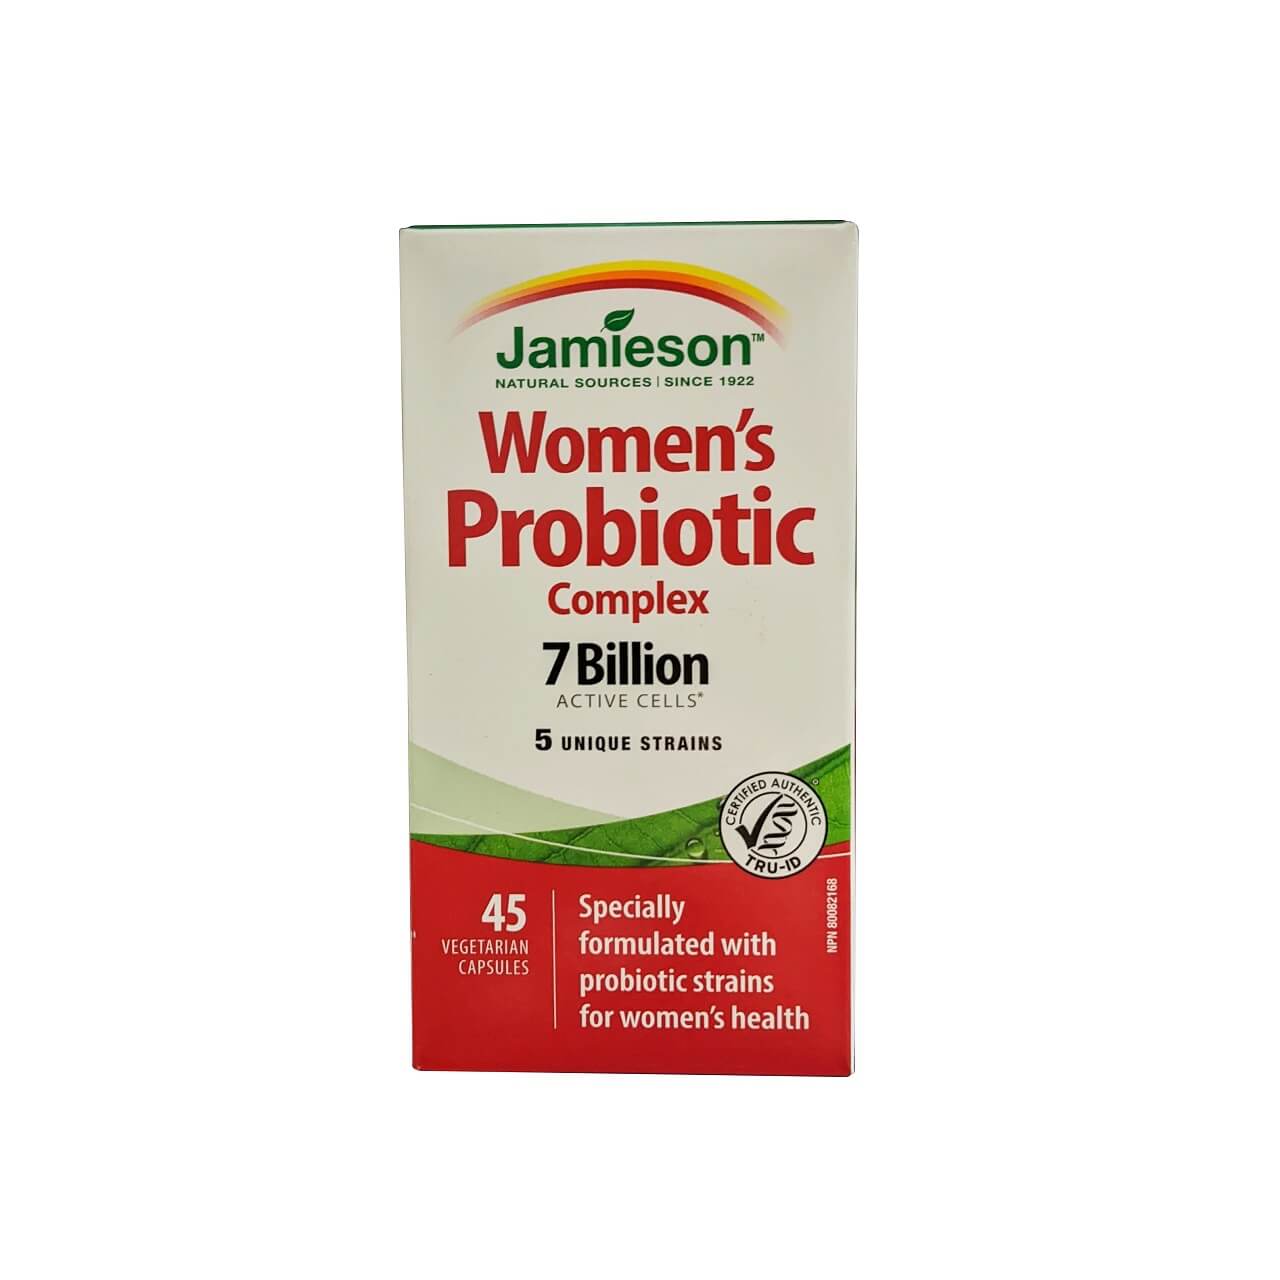 Product label for Jamieson Women's Probiotic Complex 7 Billion (45 capsules) in English